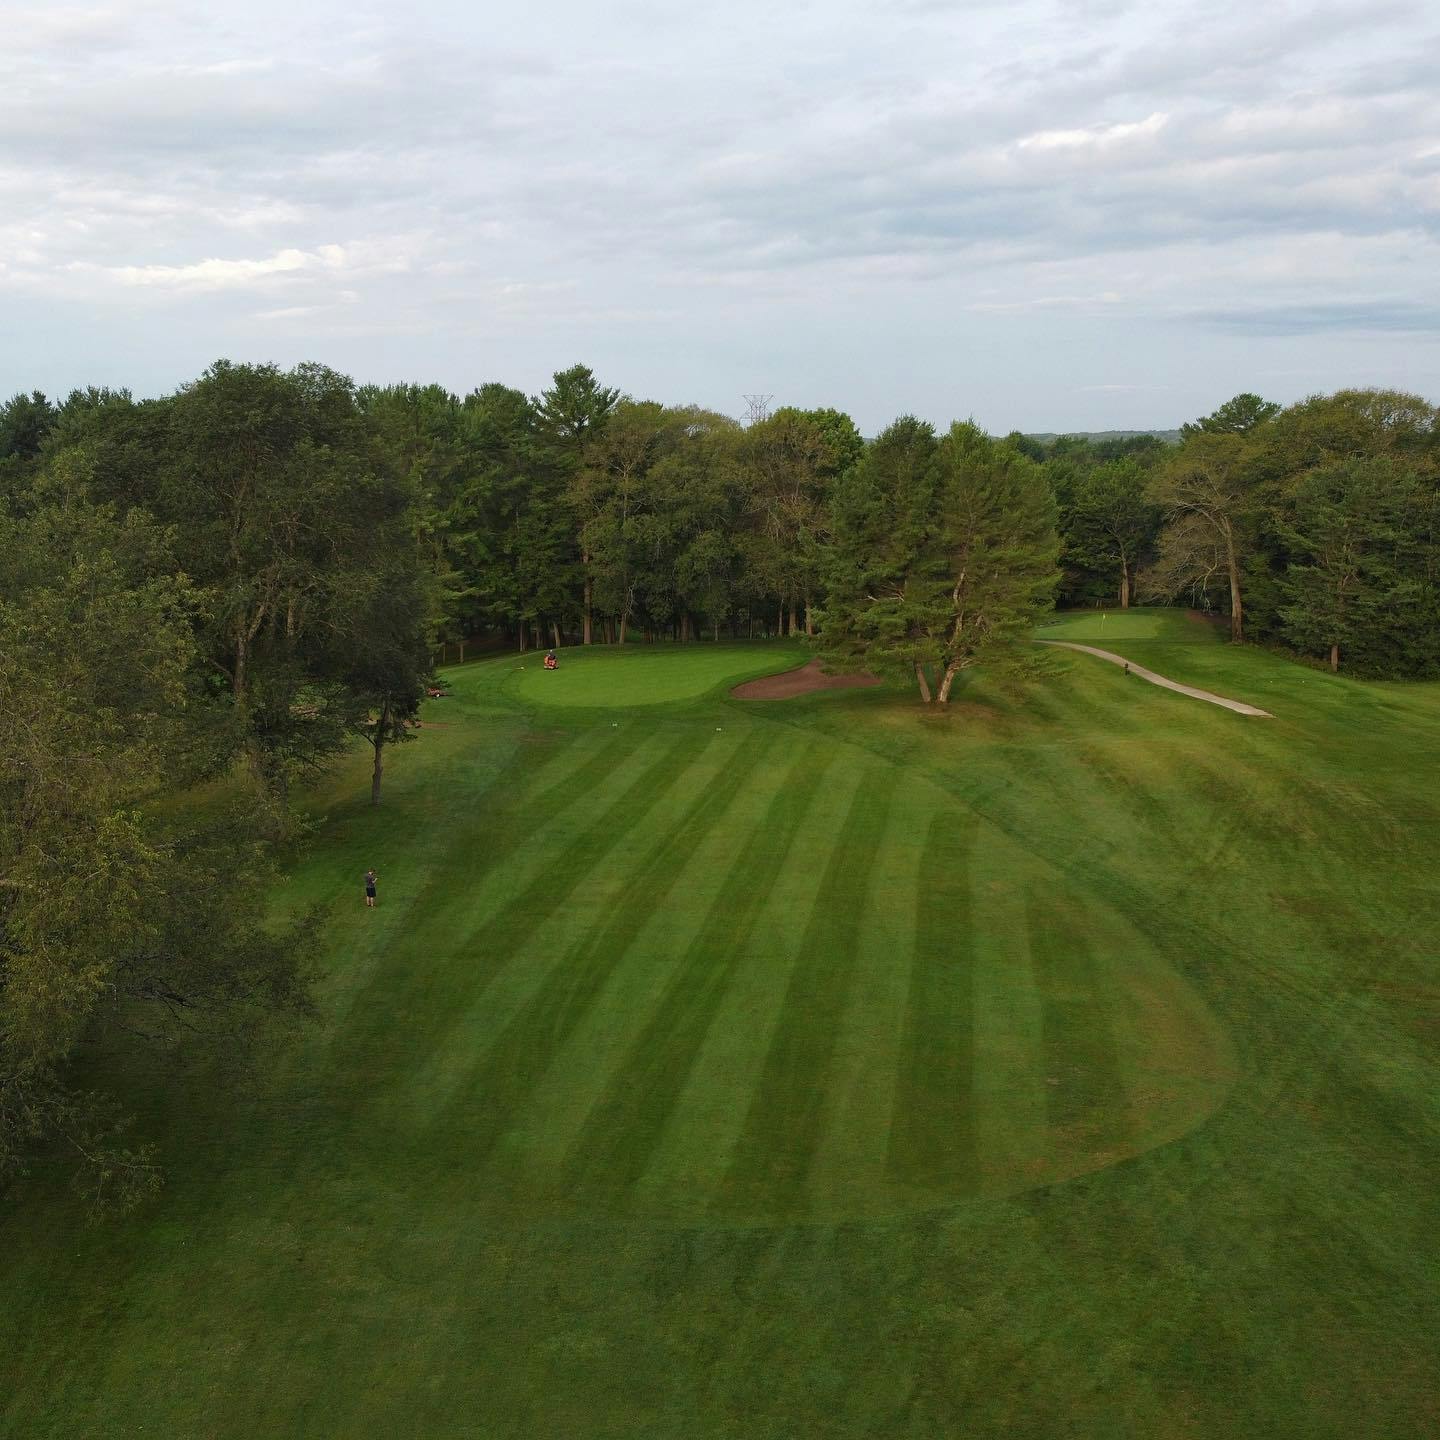 To celebrate our 70th anniversary, the north course will be used this weekend for #LSGClubChampionship. This is the first time in over 20 years! 

Day 1: North - South
Day 2: West - South

#LSG70thAnniversary